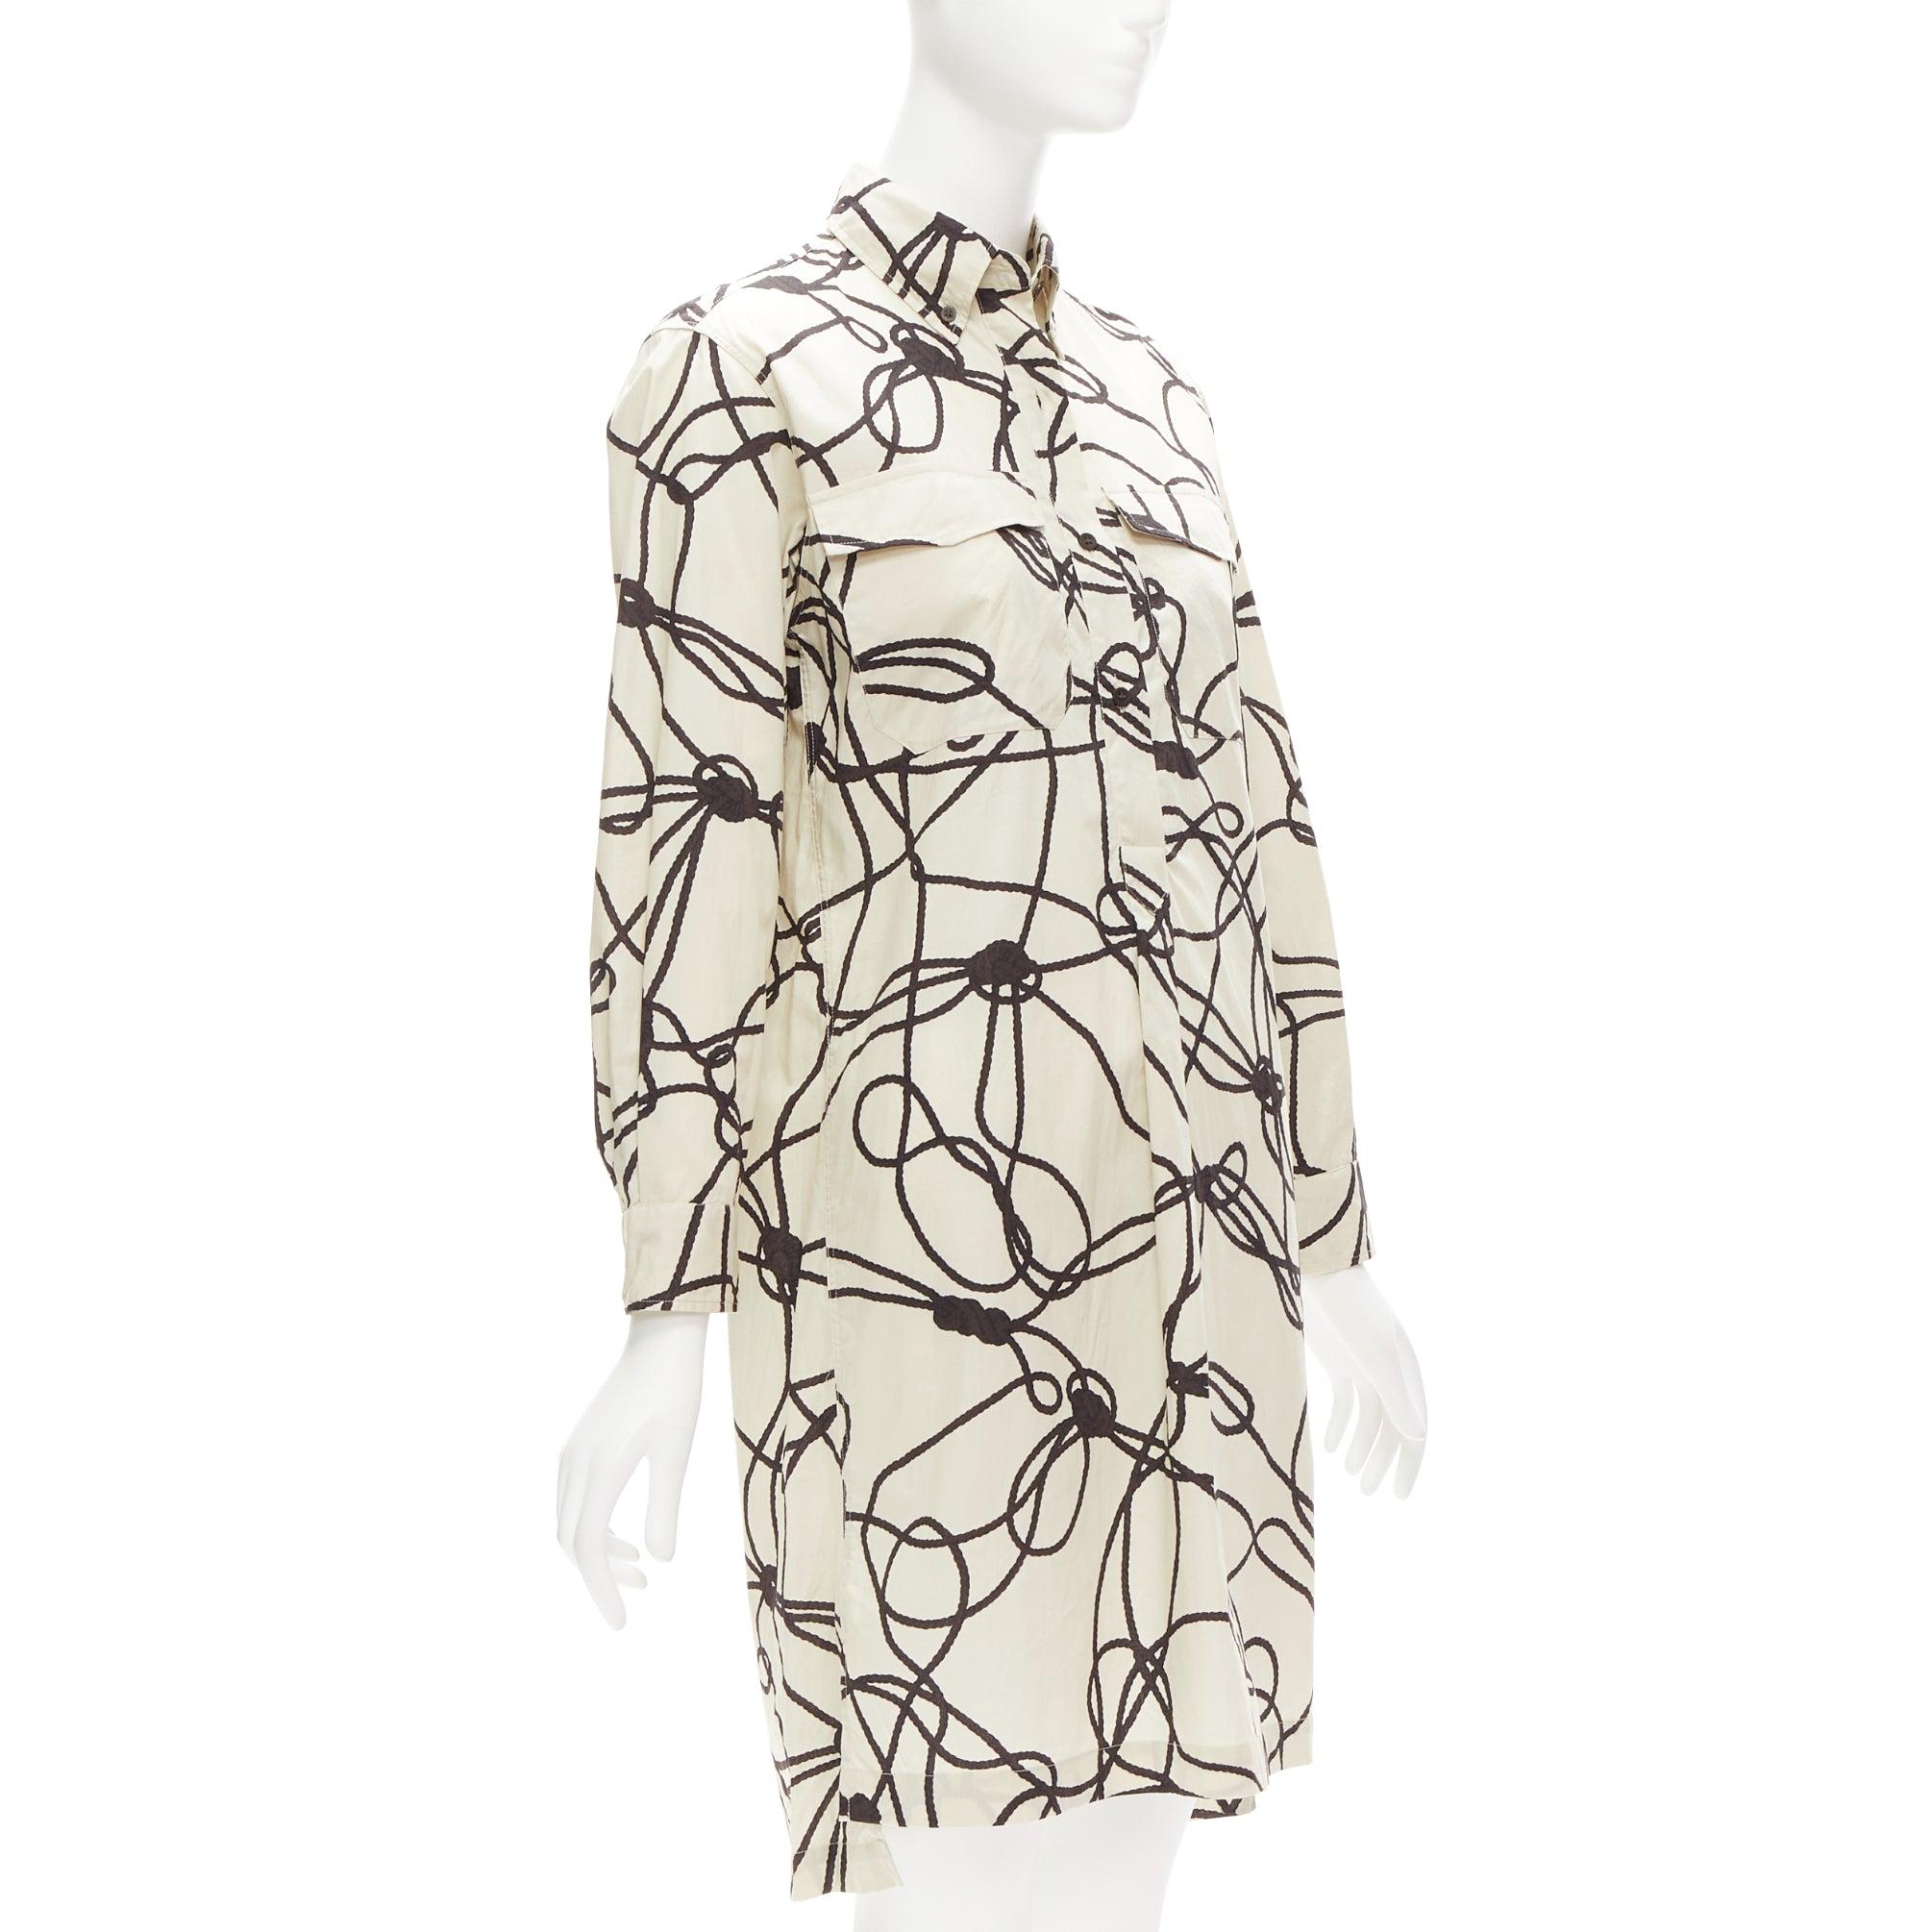 DRIES VAN NOTEN beige black rope print cotton pocketed shirt dress FR34 XS
Reference: CELG/A00290
Brand: Dries Van Noten
Material: Cotton
Color: Beige, Black
Pattern: Abstract
Closure: Button
Extra Details: Inverted pleat at back with yoke.
Made in: